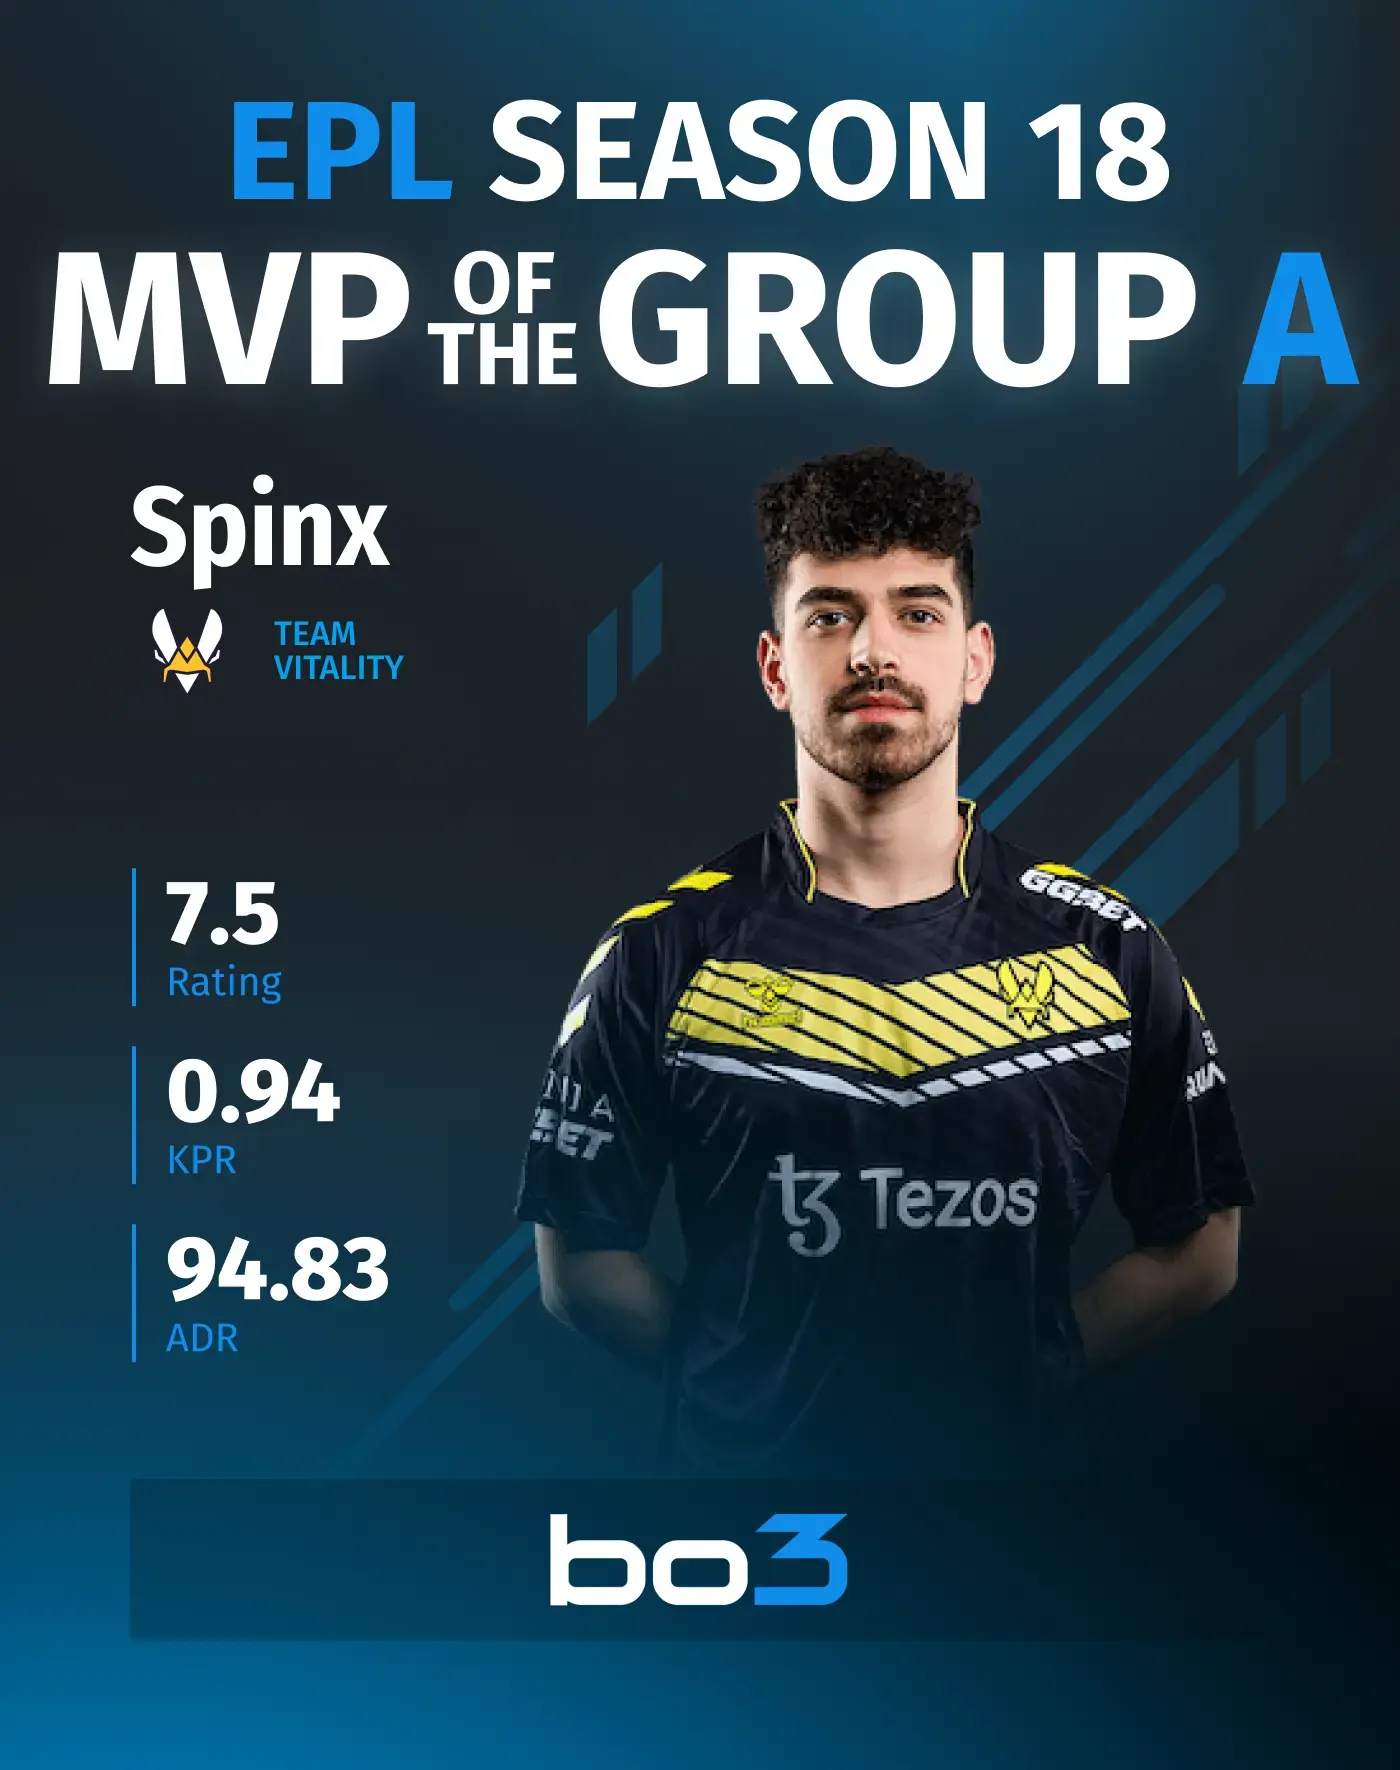  Spinx became the MVP of Group A in the ESL Pro League Season 18